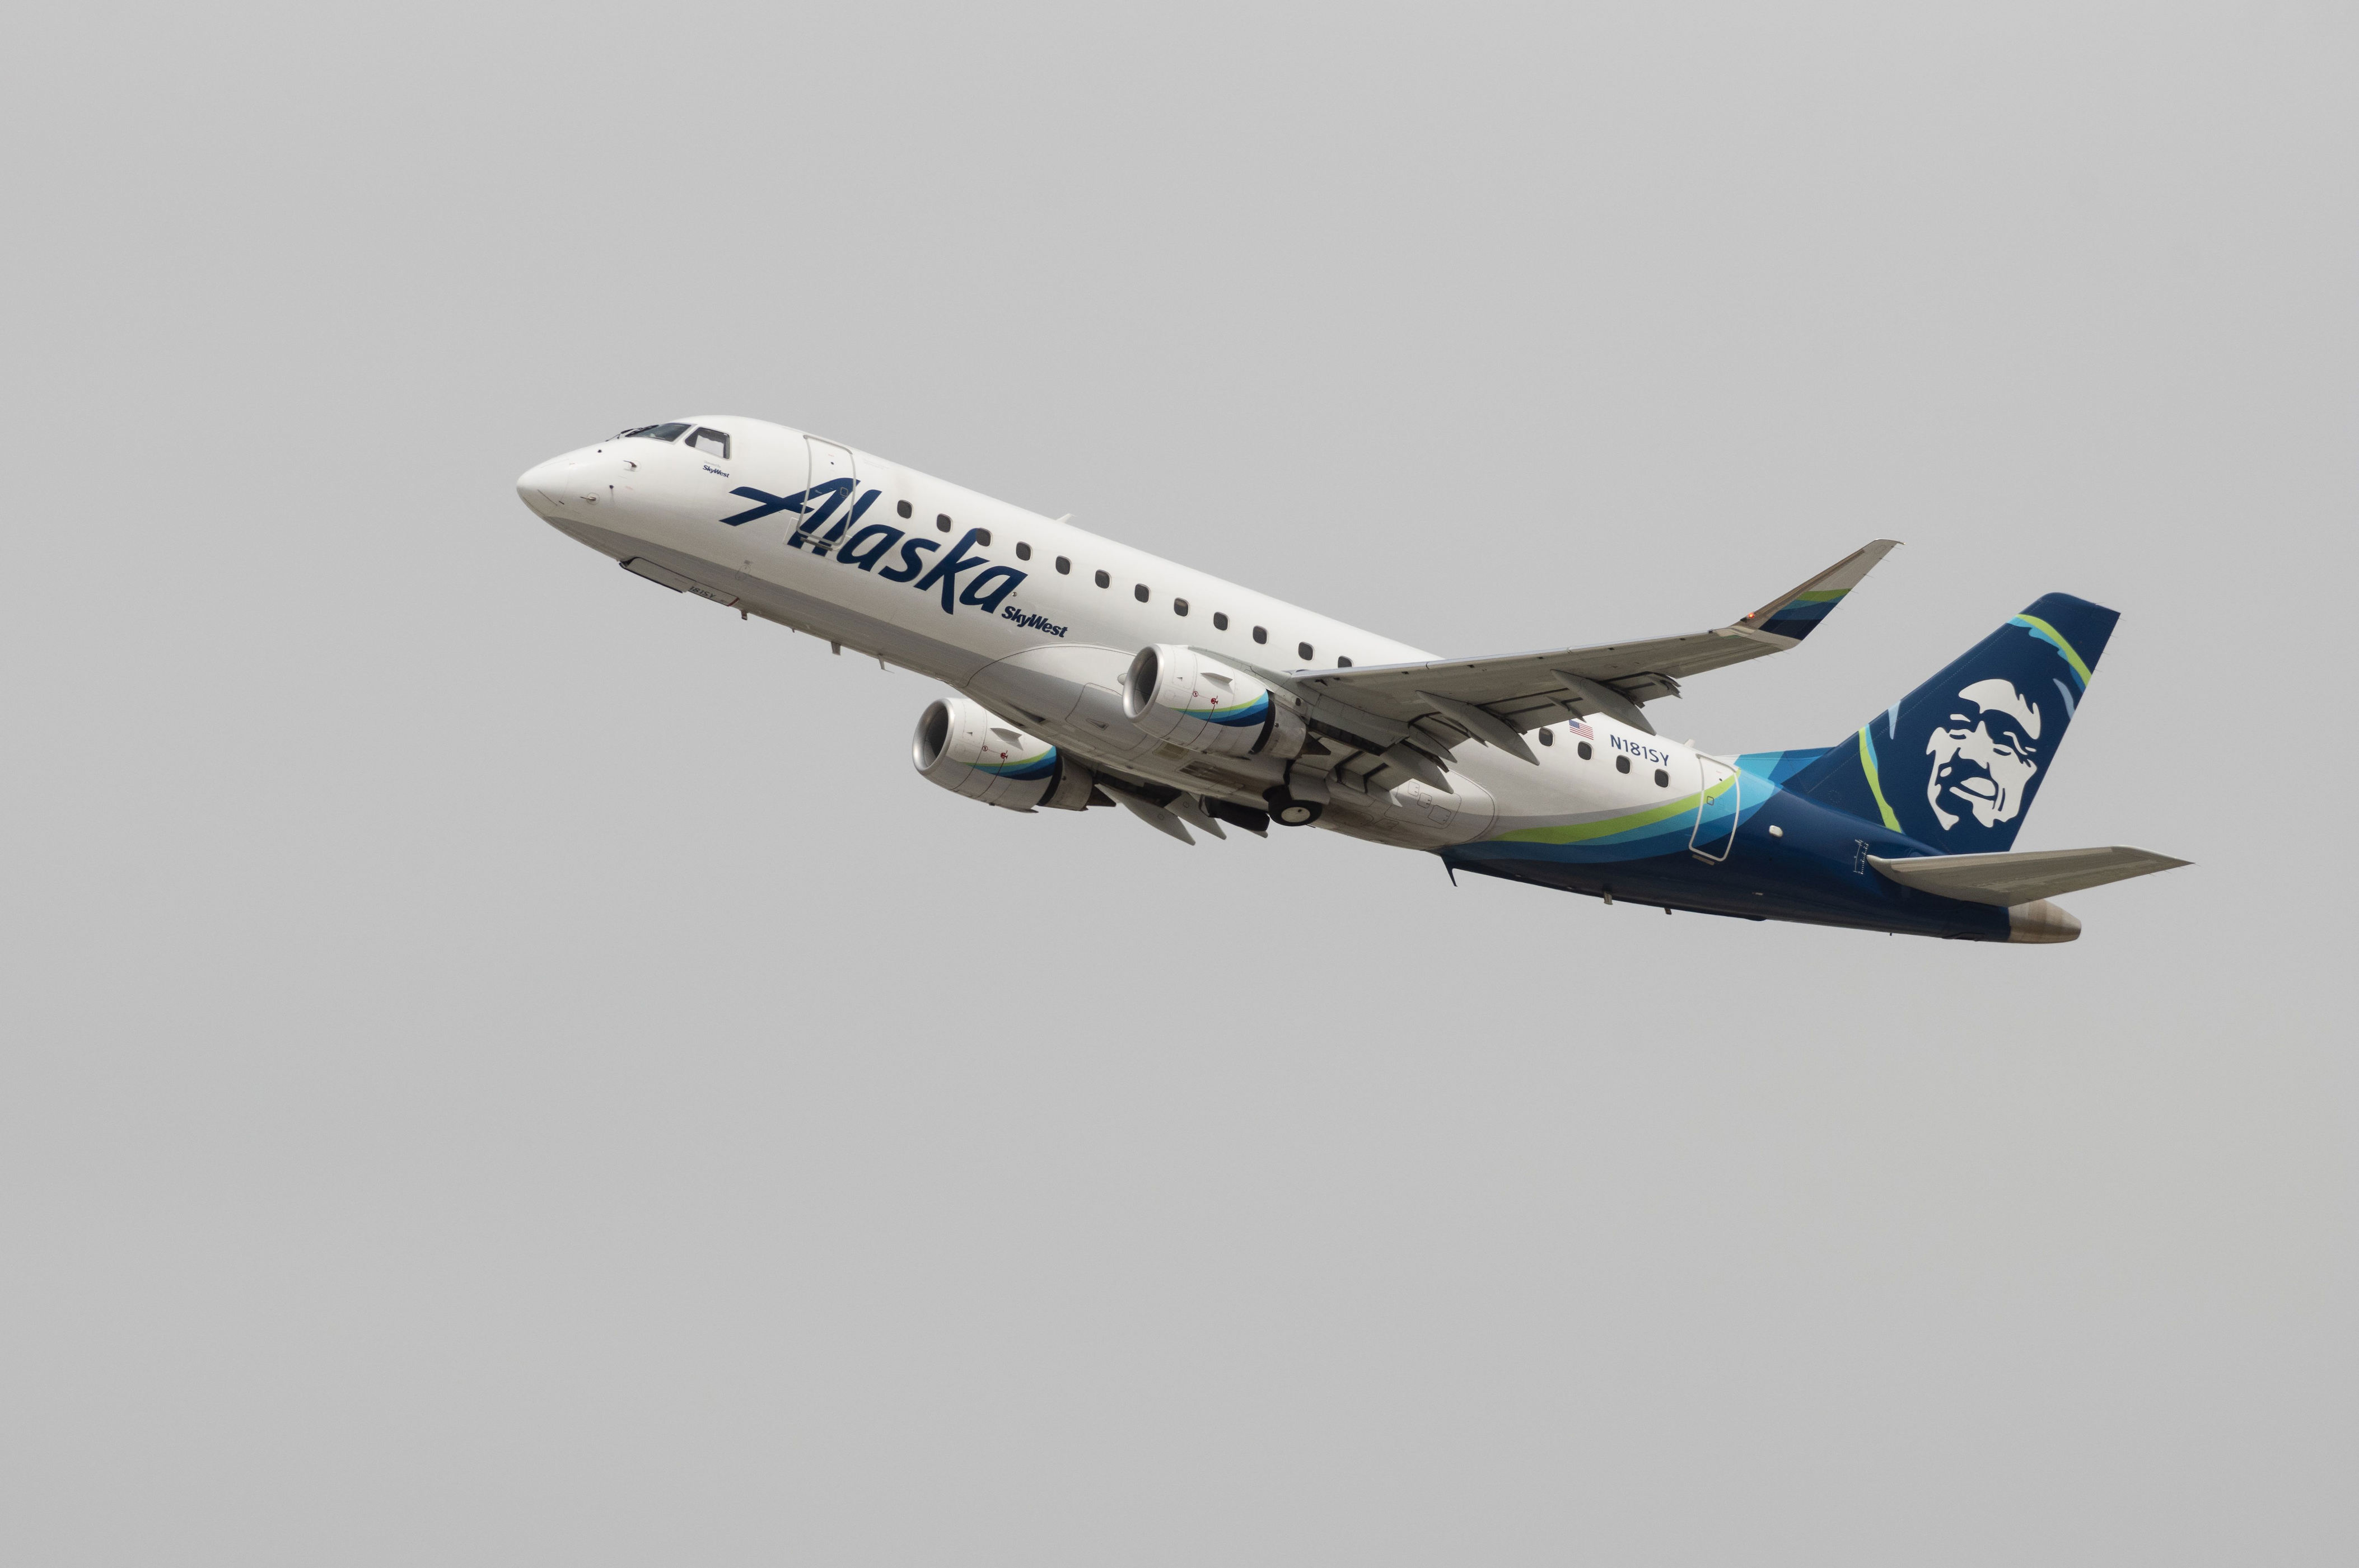 alaska airlines removes over 1,300 flights from november and december schedules